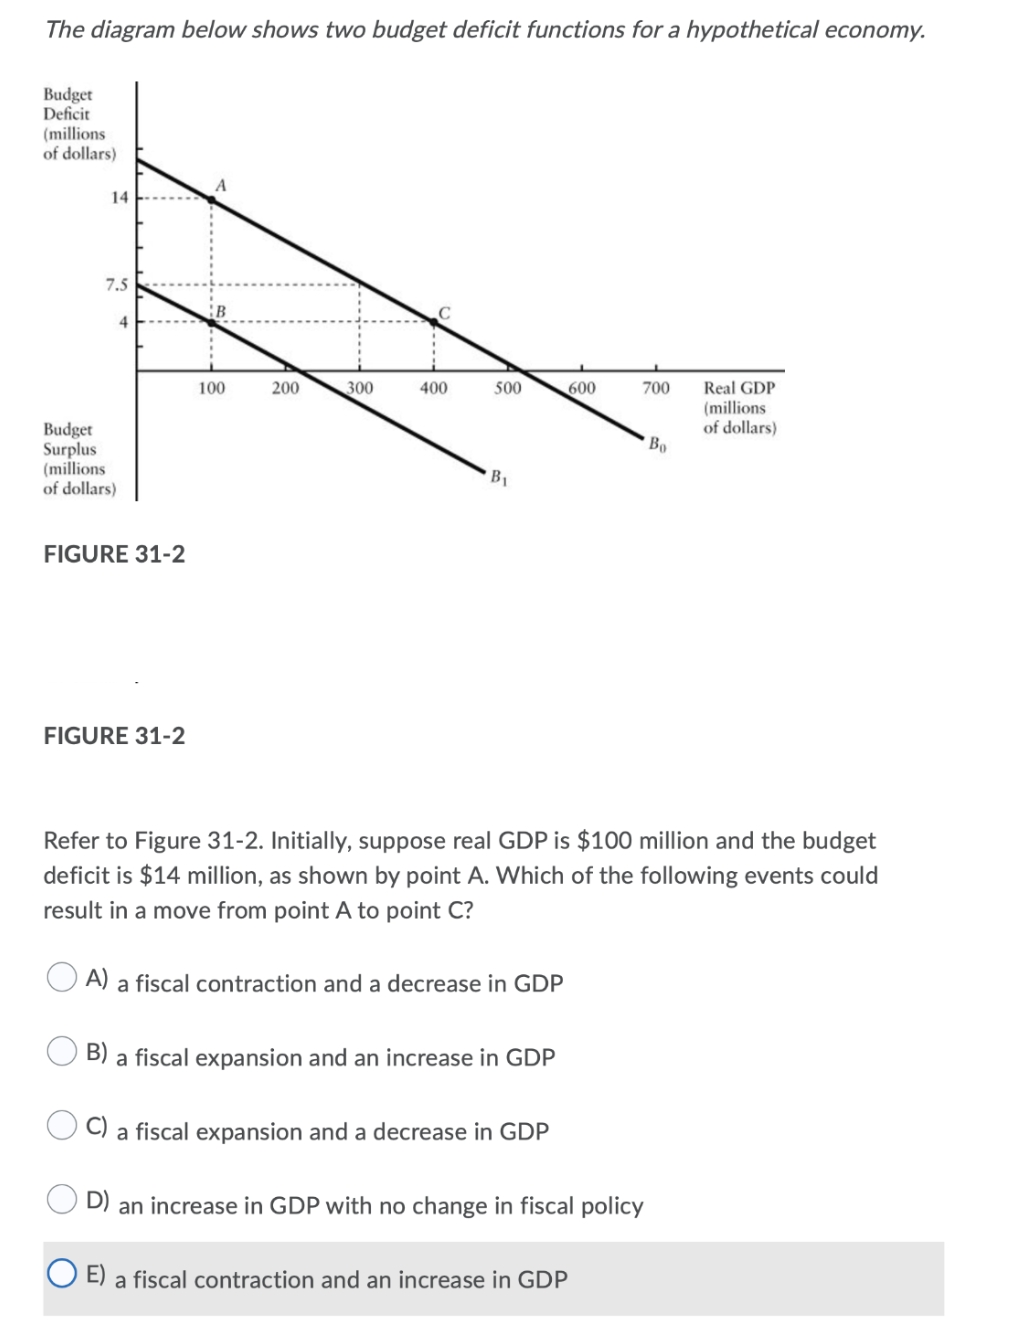 The diagram below shows two budget deficit functions for a hypothetical economy.
Budget
Deficit
(millions
of dollars)
14
7.5
4
Real GDP
(millions
of dollars)
100
200
300
400
500
600
700
Budget
Surplus
(millions
of dollars)
Bo
B1
FIGURE 31-2
FIGURE 31-2
Refer to Figure 31-2. Initially, suppose real GDP is $100 million and the budget
deficit is $14 million, as shown by point A. Which of
following
vents coul
result in a move from point A to point C?
A) a fiscal contraction and a decrease in GDP
B) a fiscal expansion and an increase in GDP
C)
a fiscal expansion and a decrease in GDP
an increase in GDP with no change in fiscal policy
E)
a fiscal contraction and an increase in GDP
